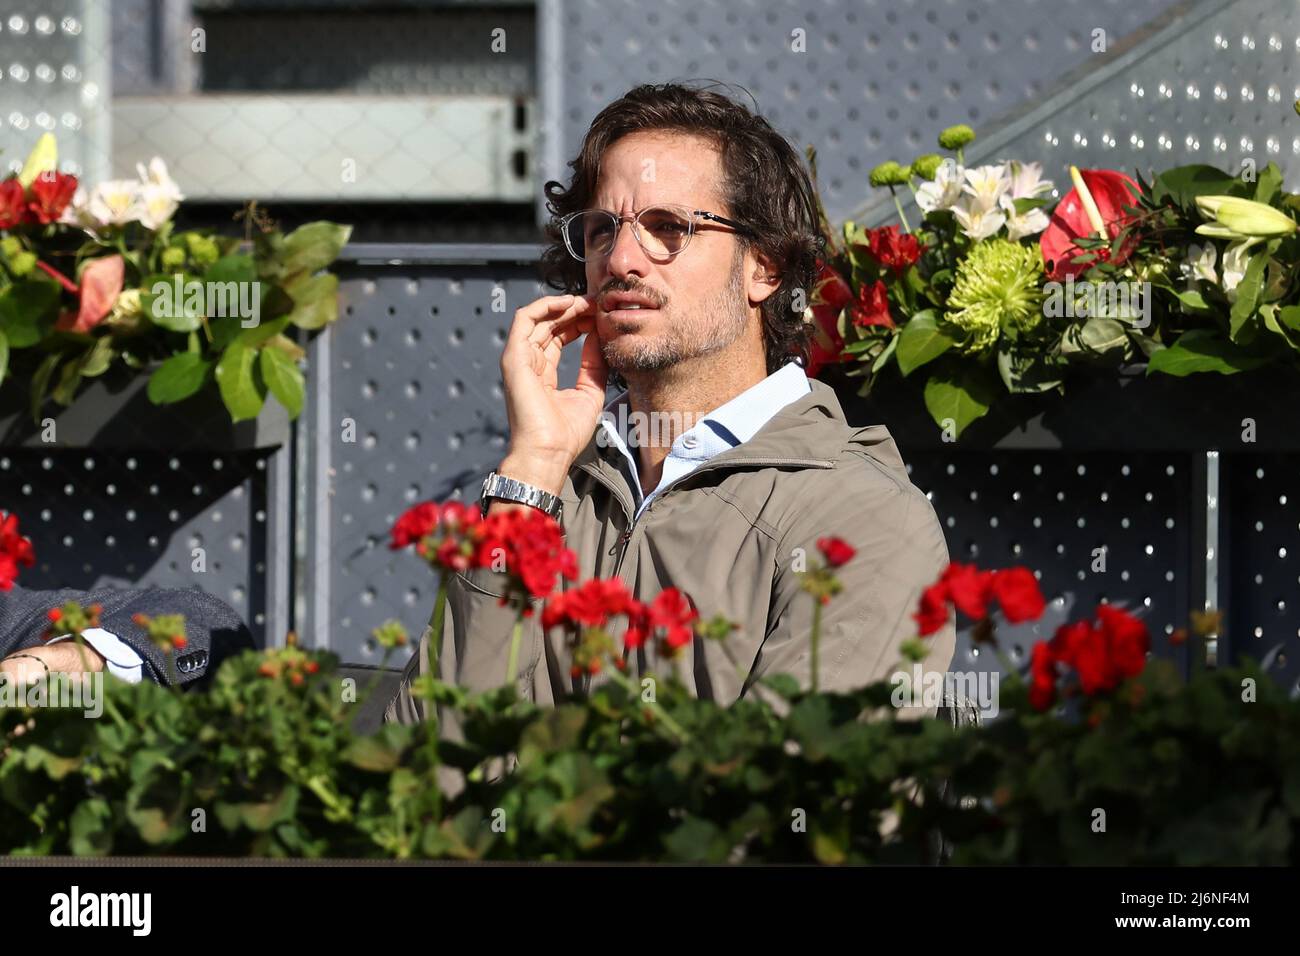 May 2, 2022, Madrid, Spain: Feliciano Lopez, Director of the tournament, is  seen during the practice of Rafael Nadal of Spain and Alexander Zverev of  Germany during the Mutua Madrid Open 2022